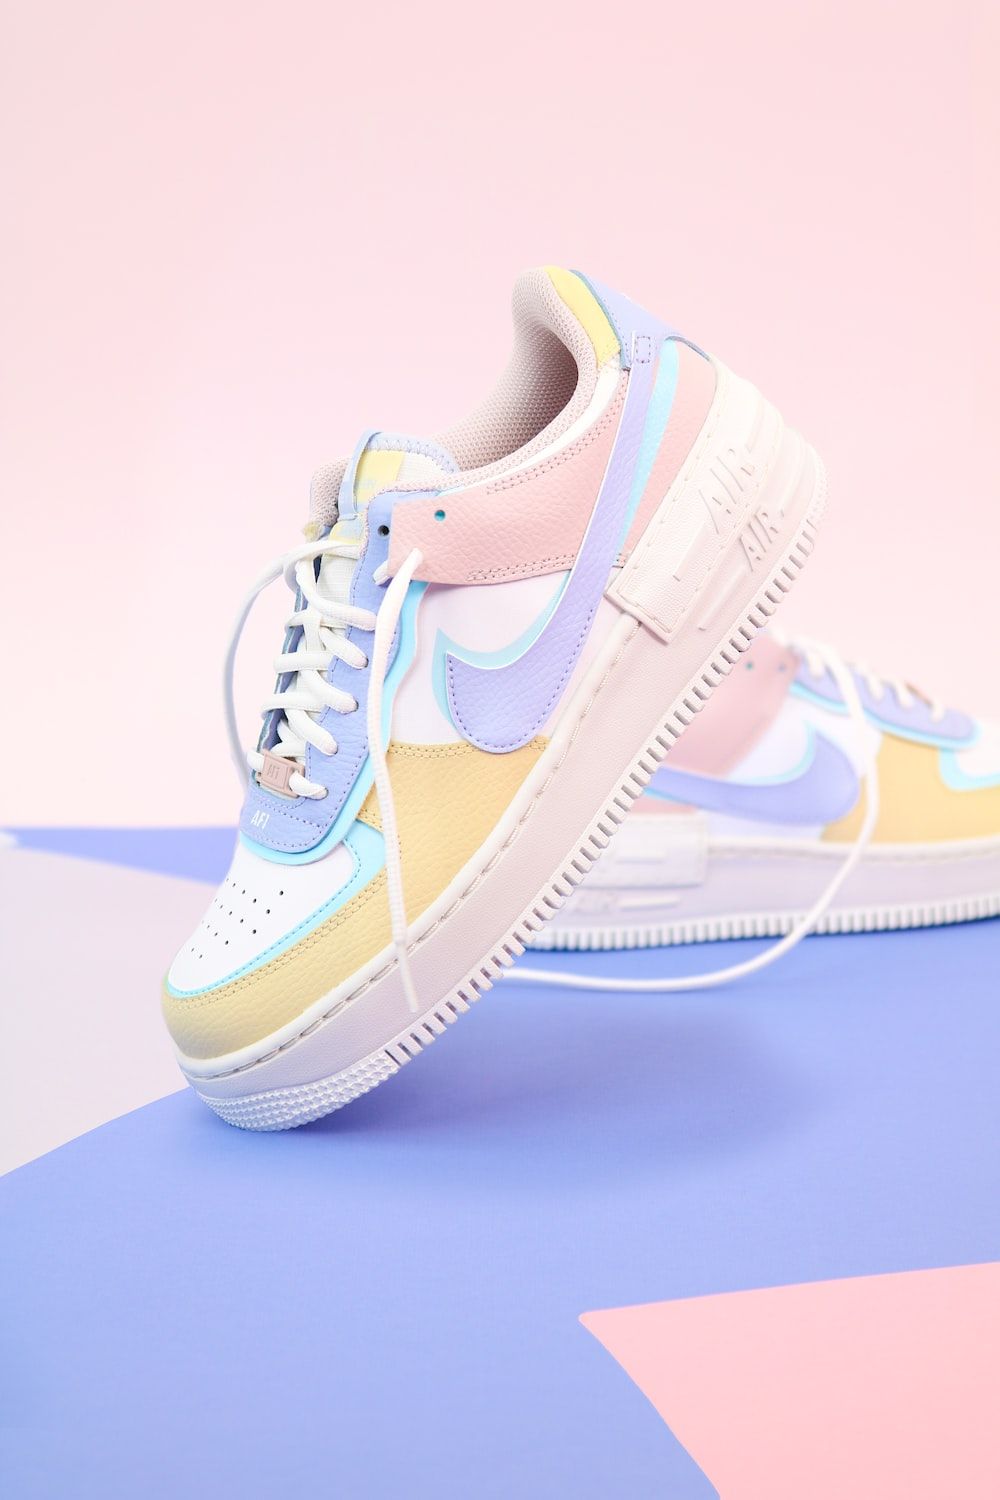 Nike Air Force 1 Picture. Download Free Image